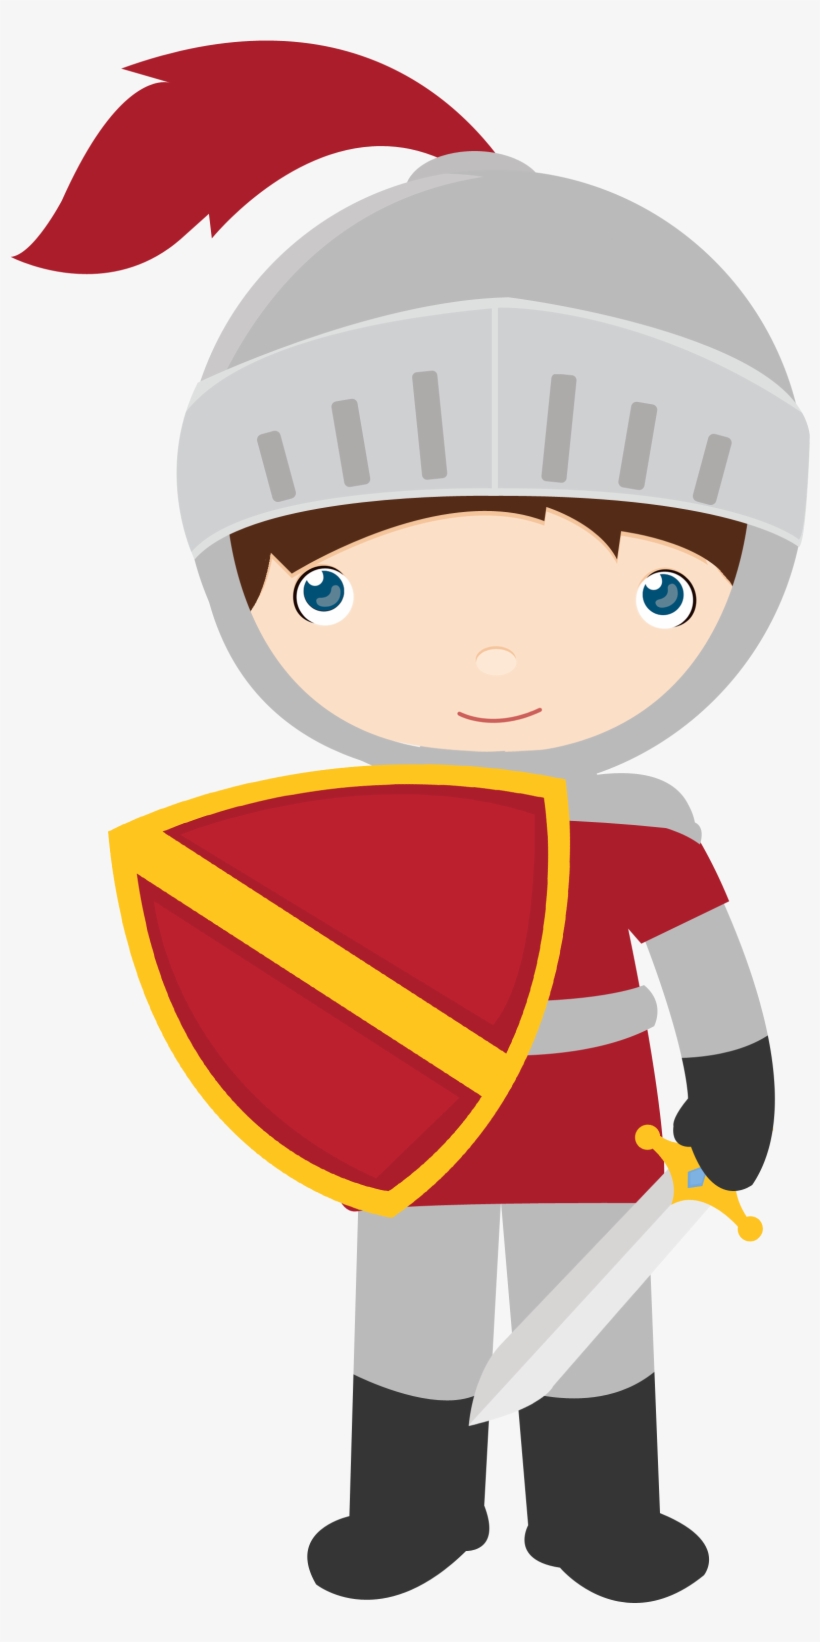 Dashing Clipart Minus Sign - Knight Clipart, transparent png #2369048